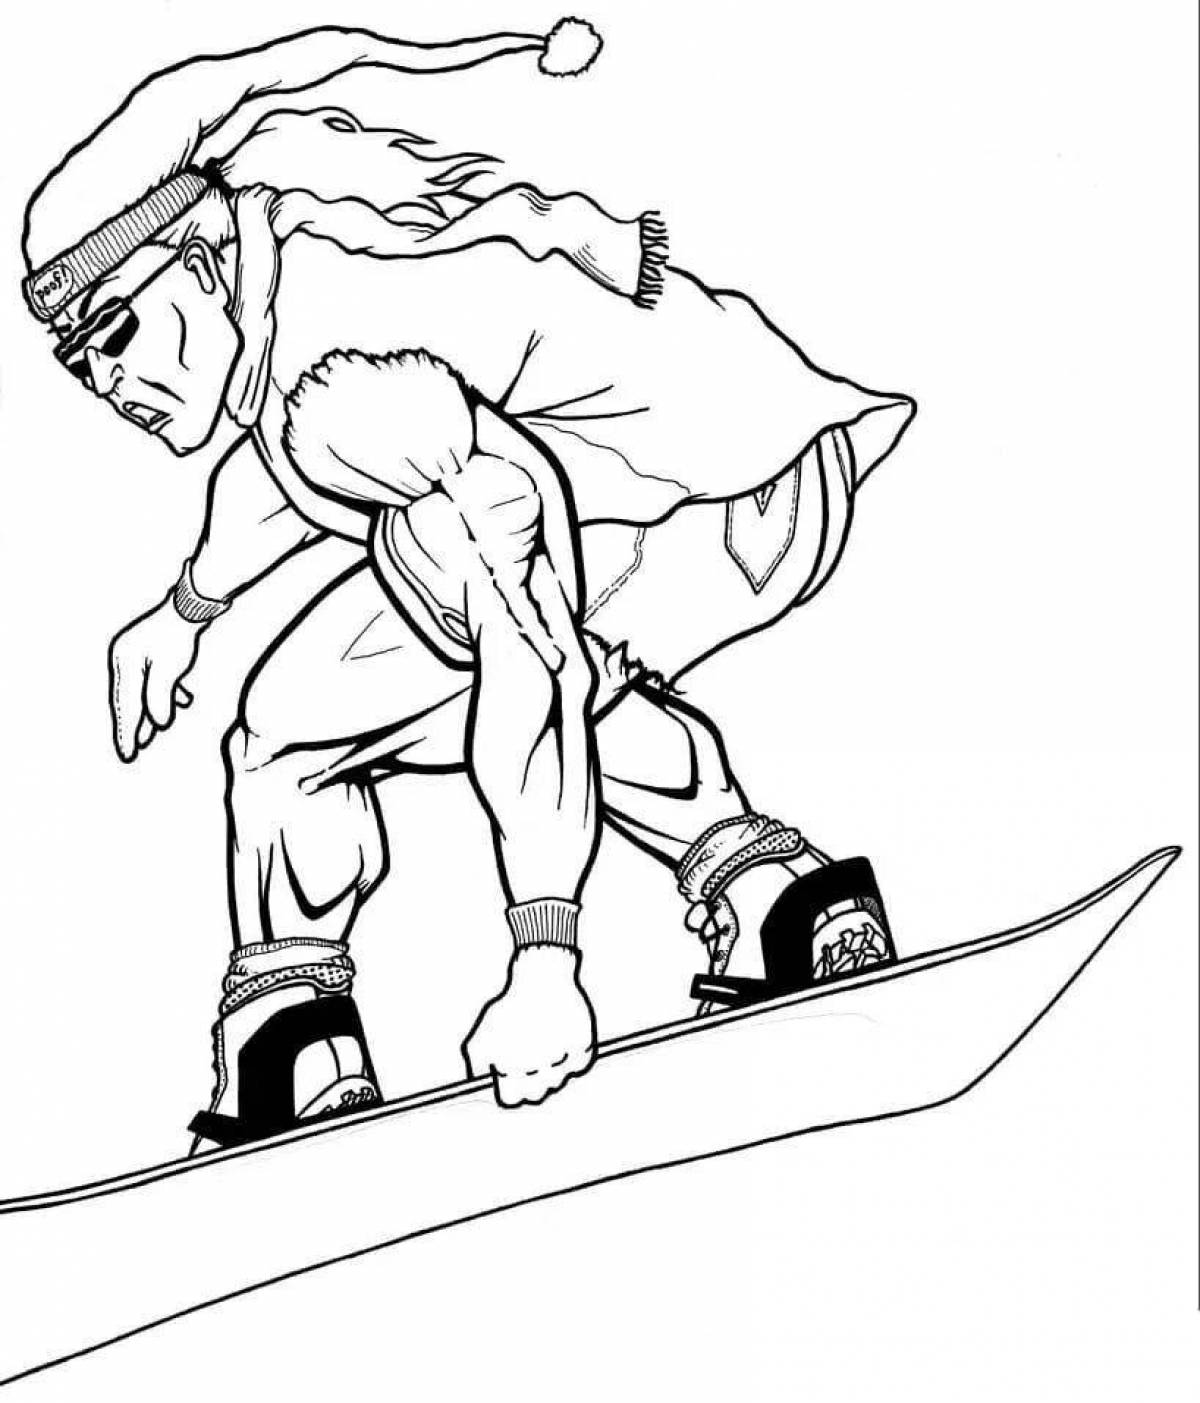 Majestic snowboard coloring page